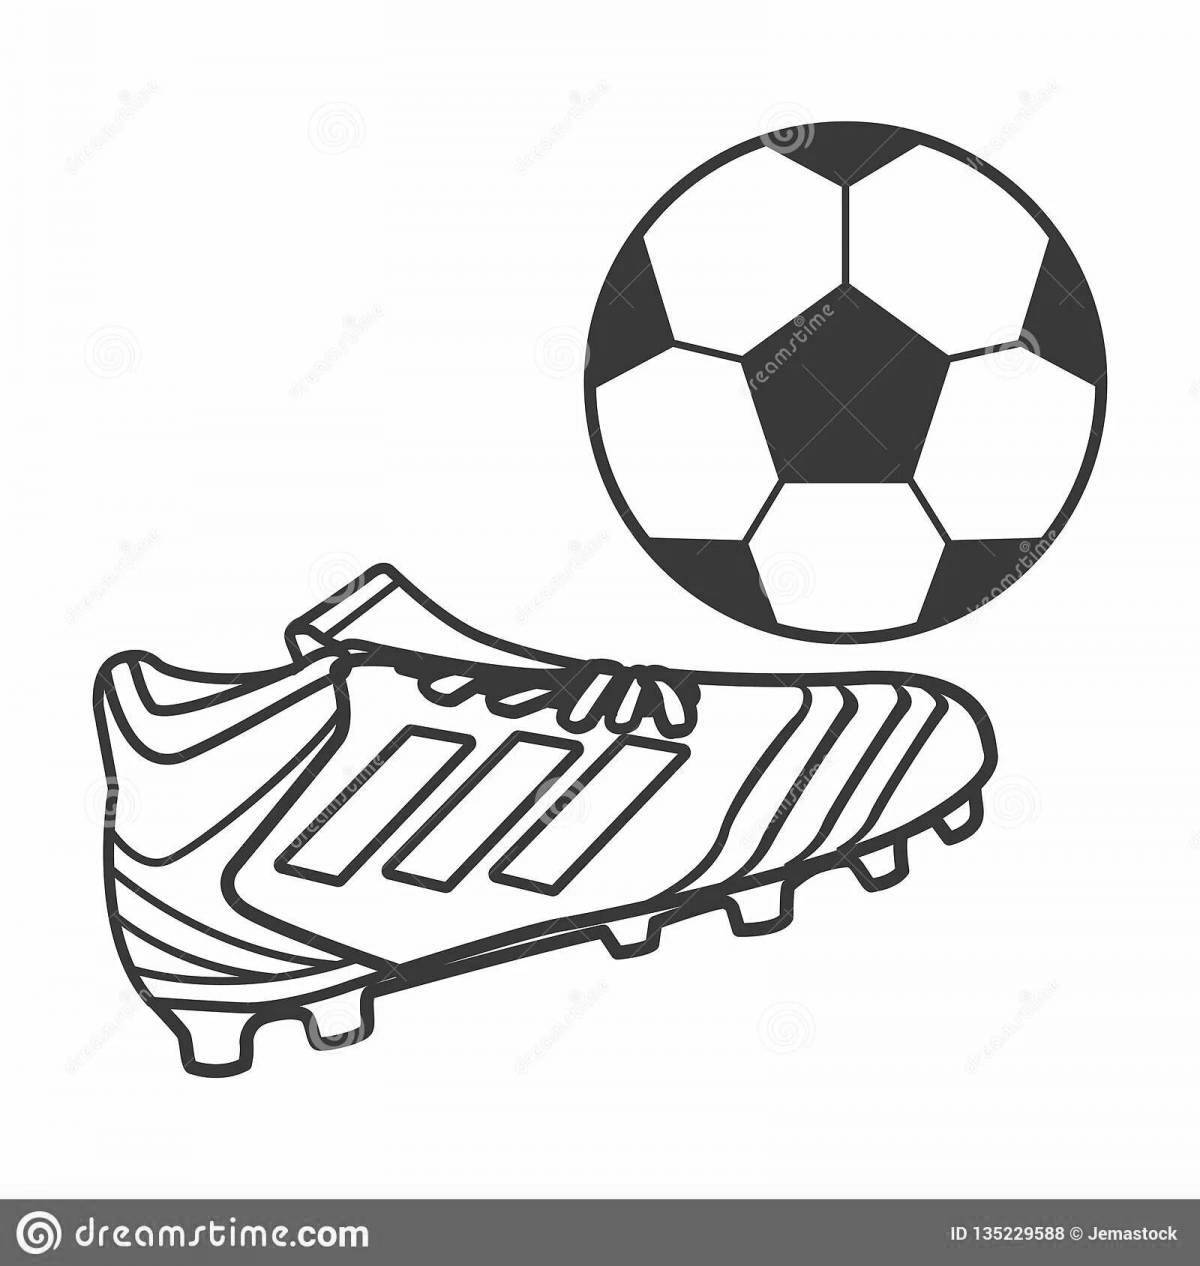 Funny nike ball coloring book